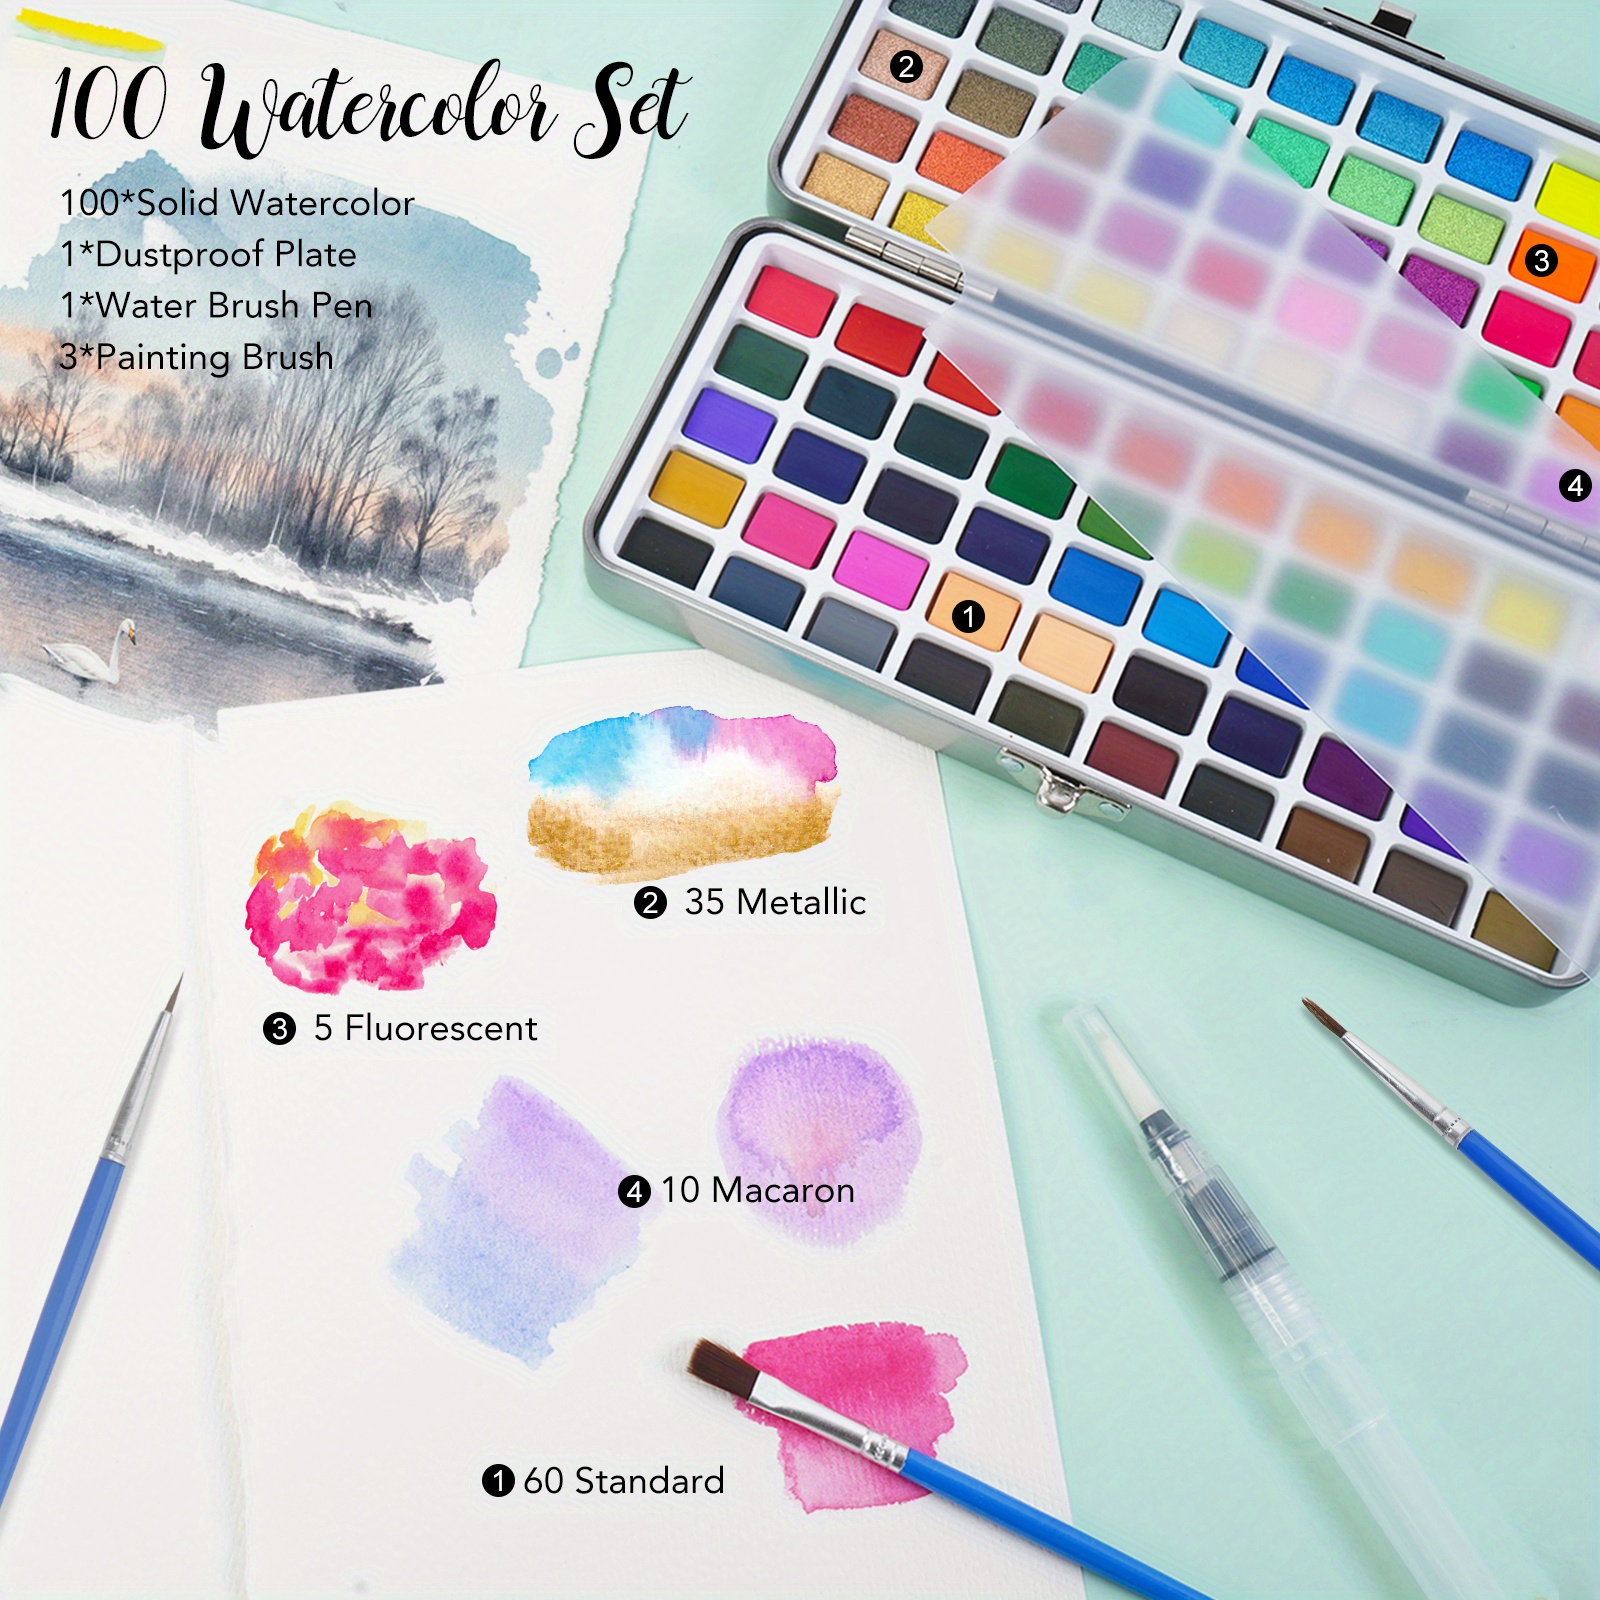 Top 5 Watercolor Paint Sets for Creating Expressive and Vibrant